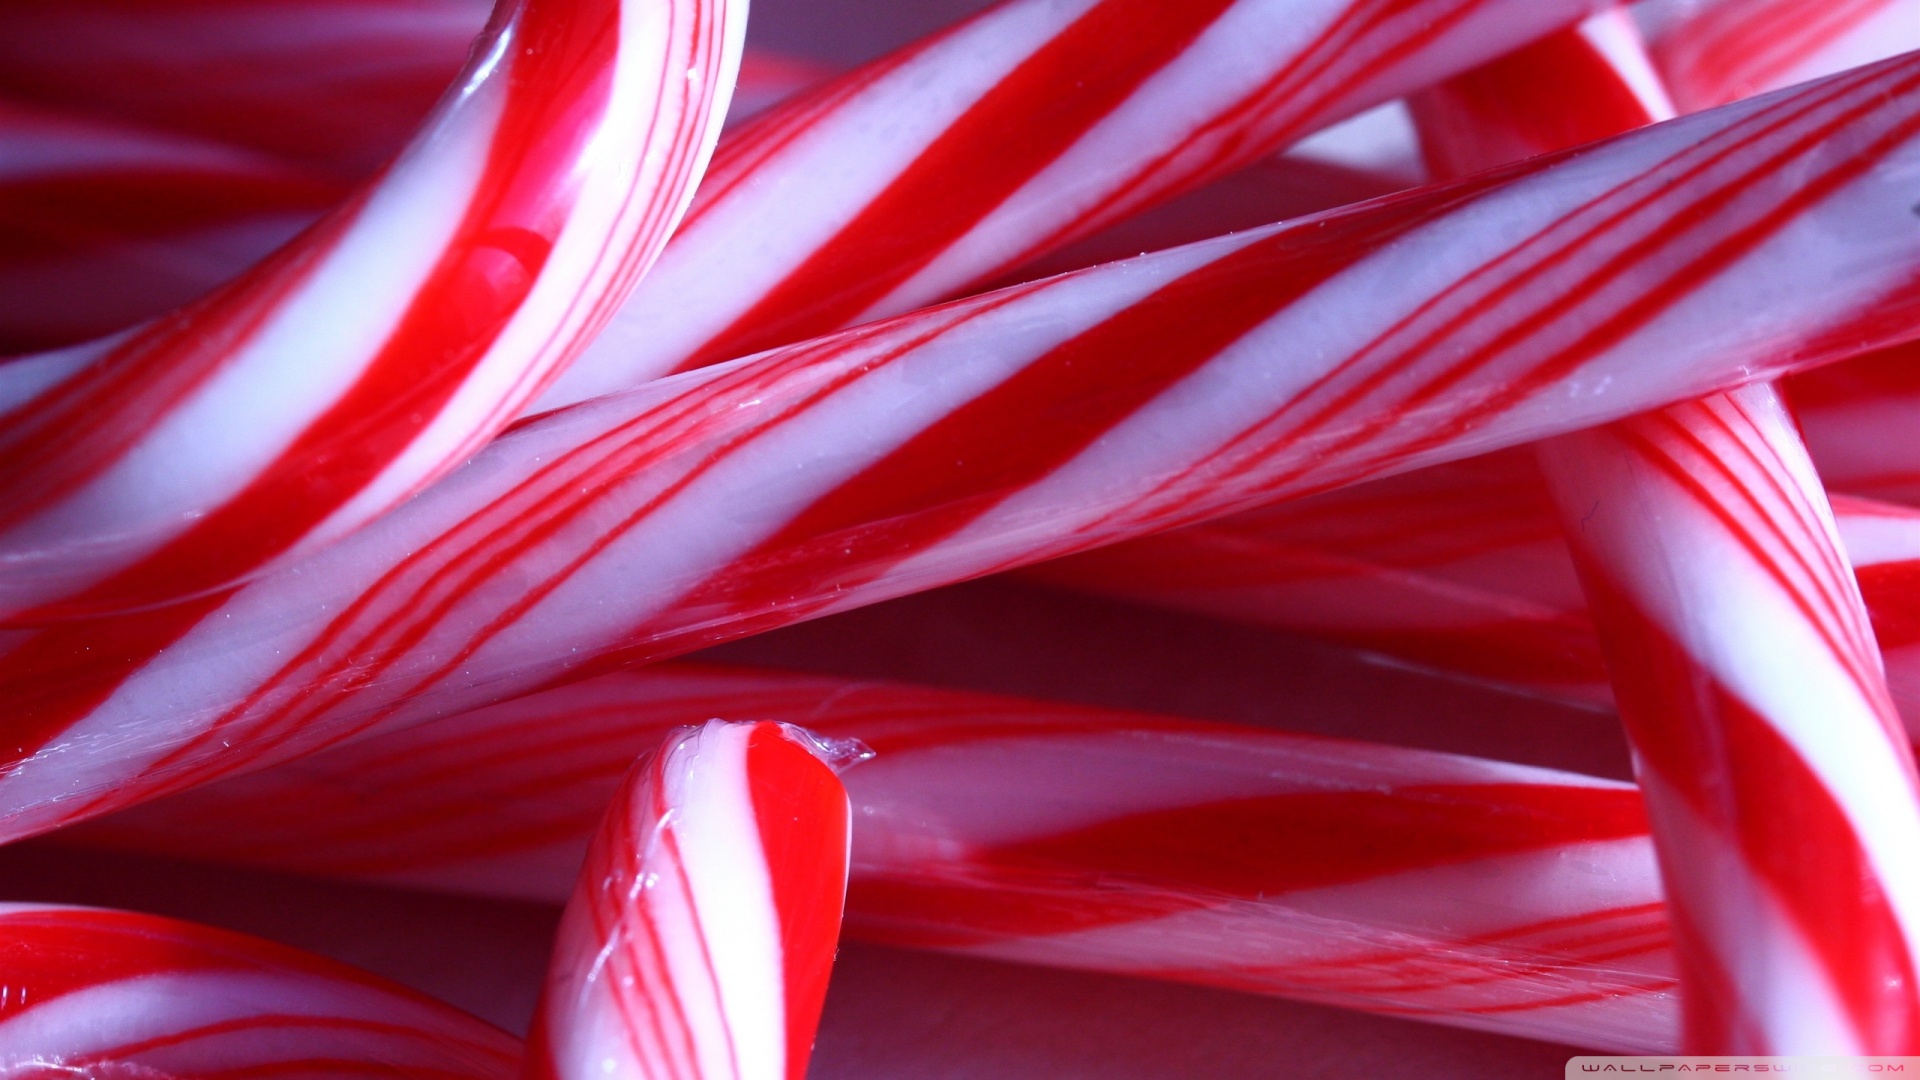 Candy Cane Wallpaper Candy canes wallpaper